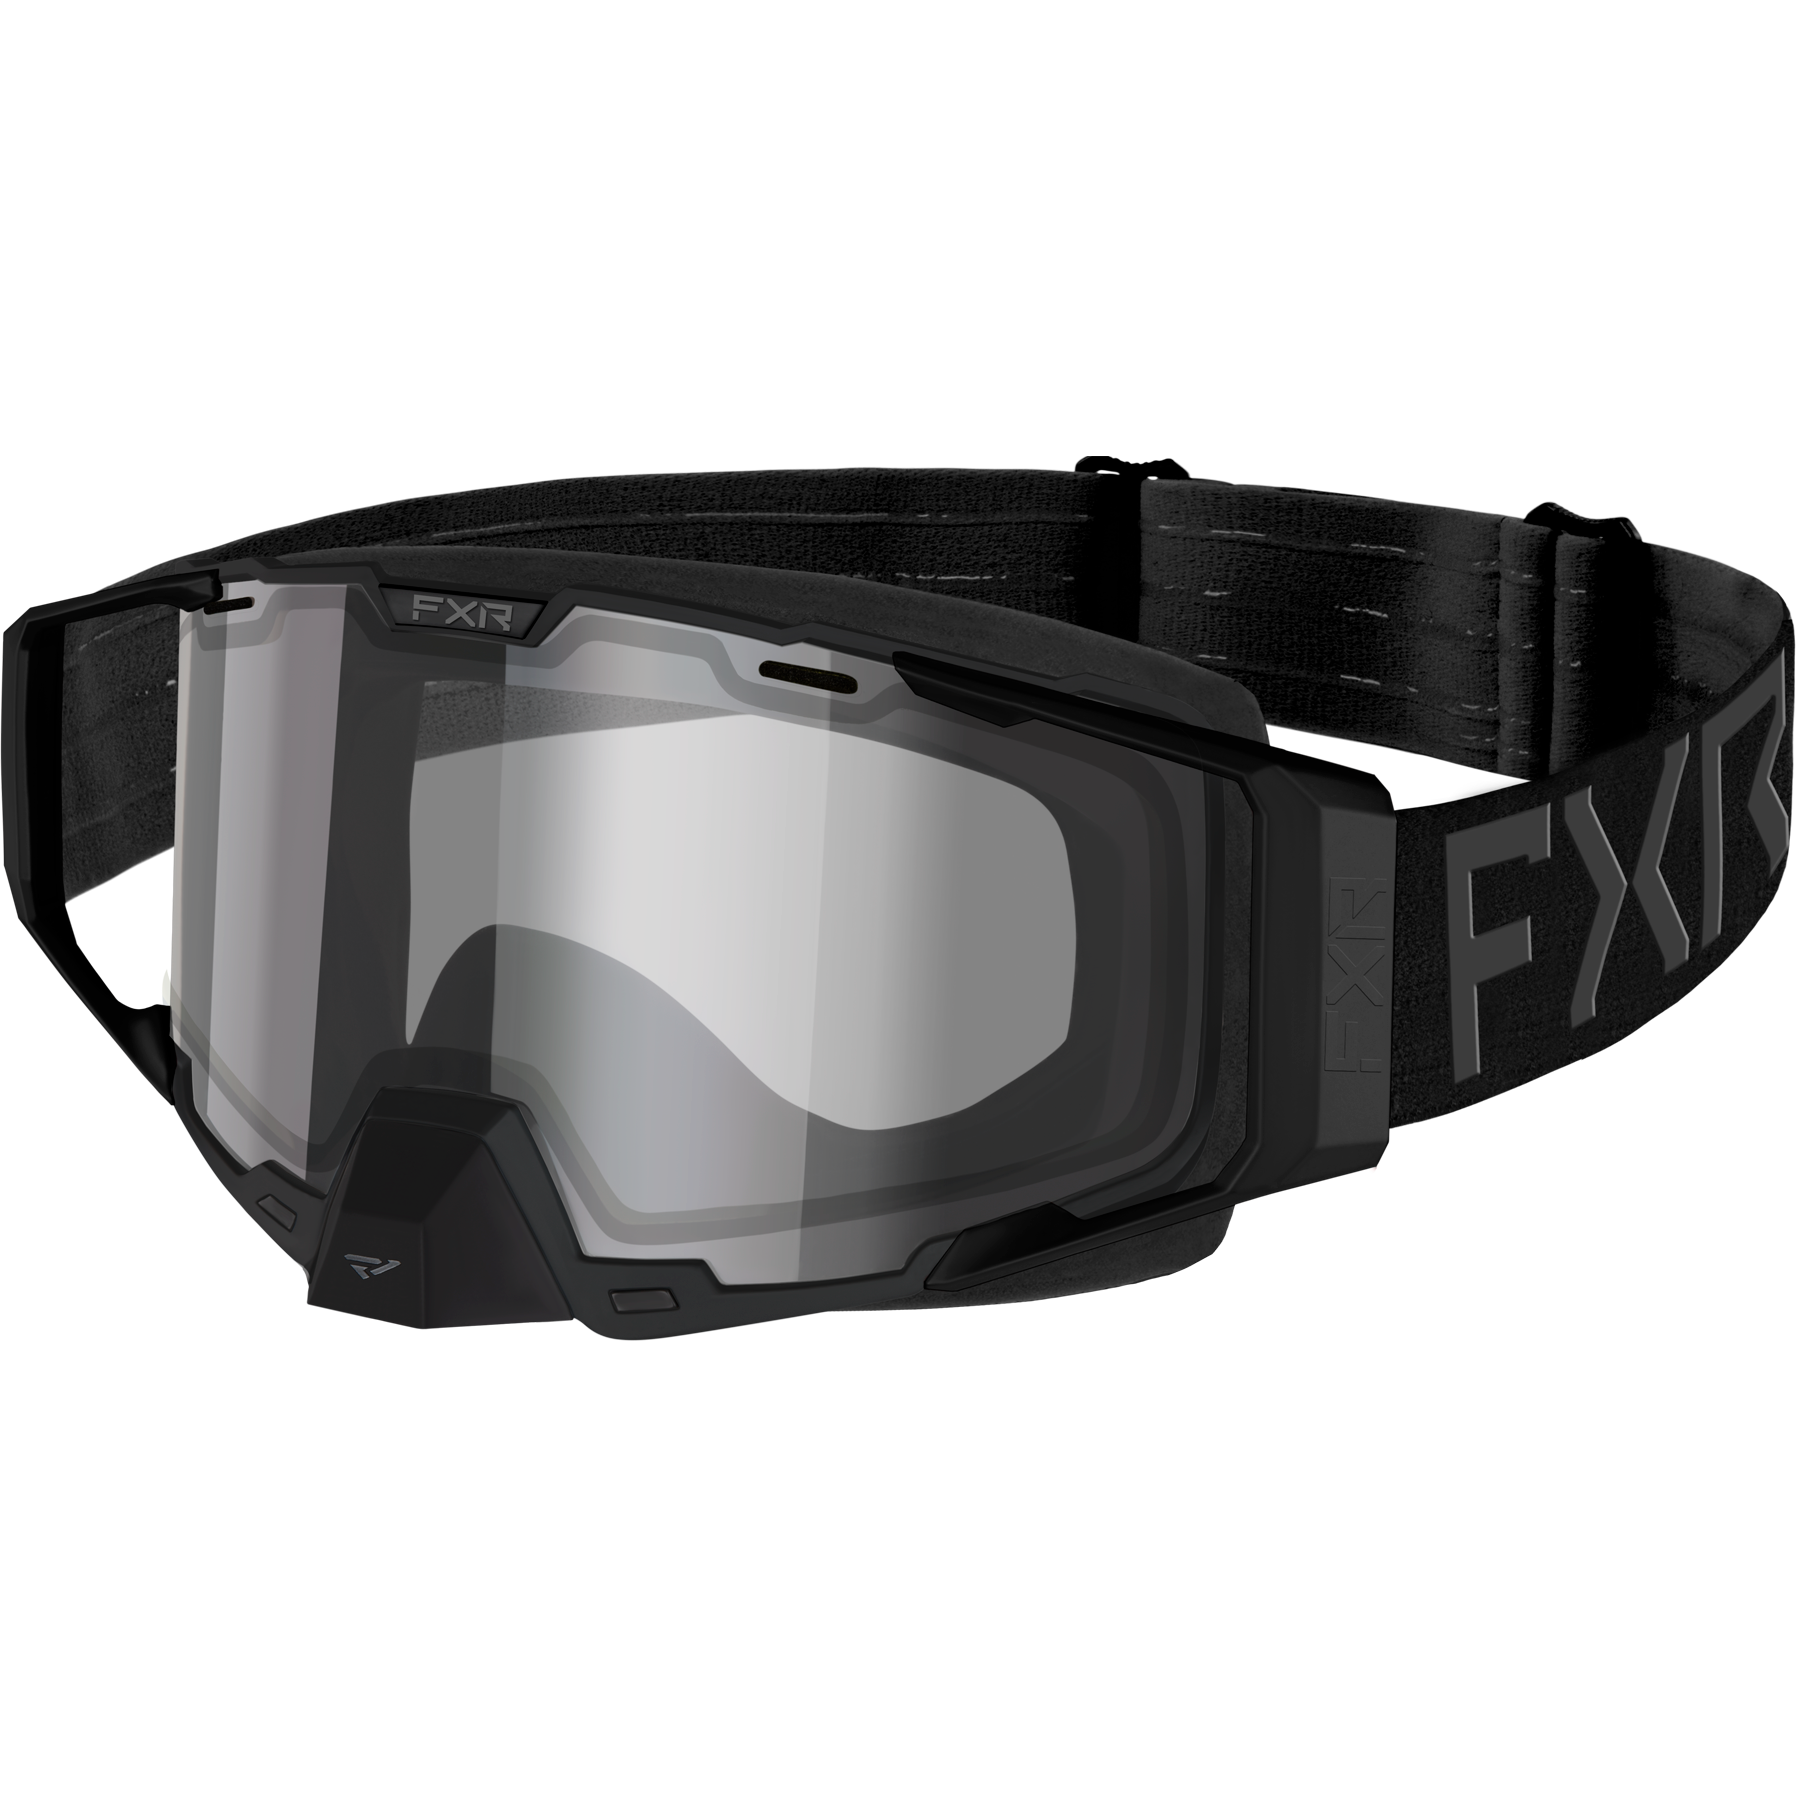 fxr racing goggles adult combat coldstop clear goggles - snowmobile